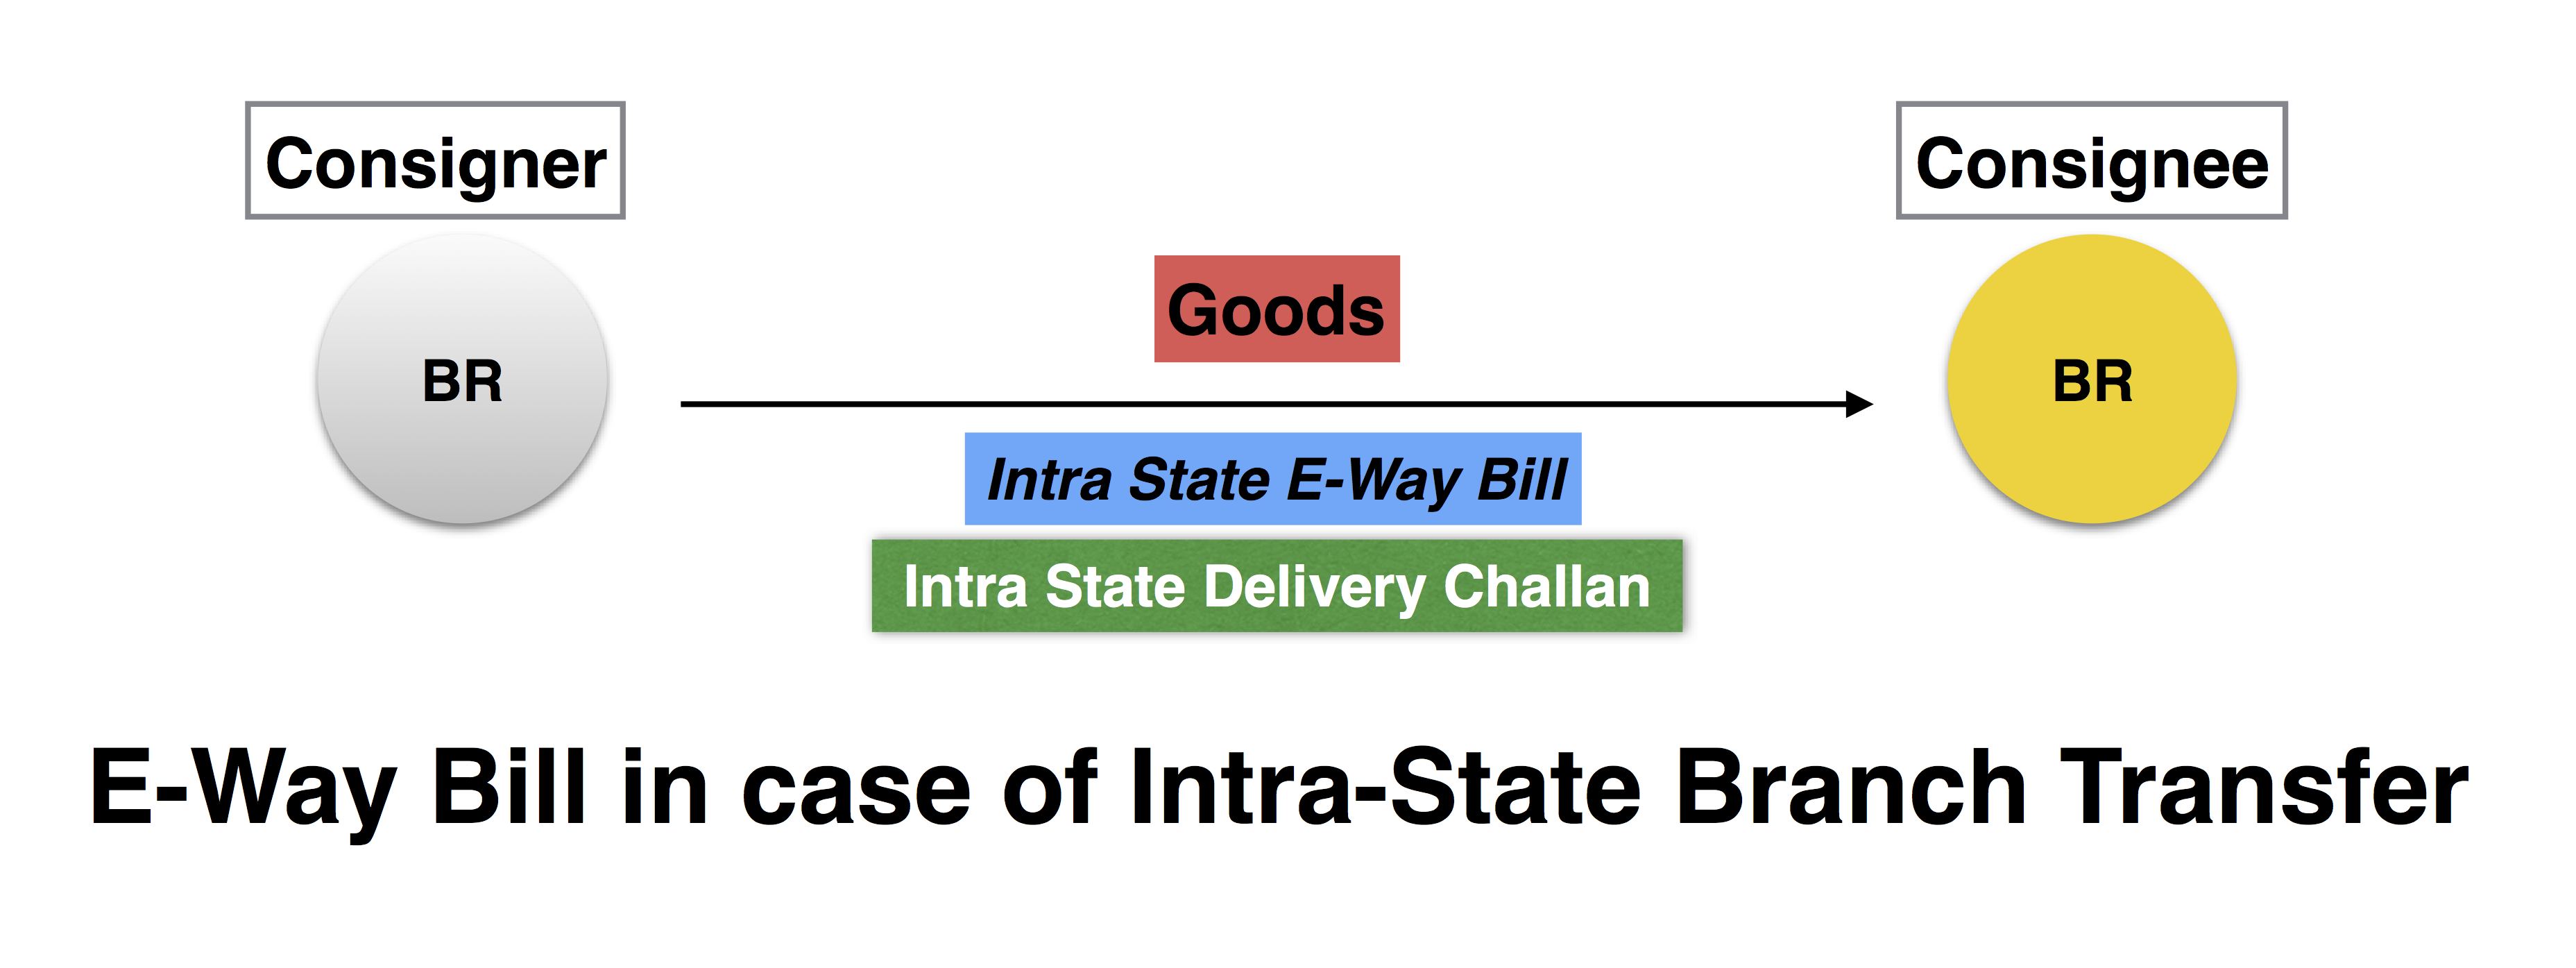 E-Way Bill in case of Intra-State Branch Transfer